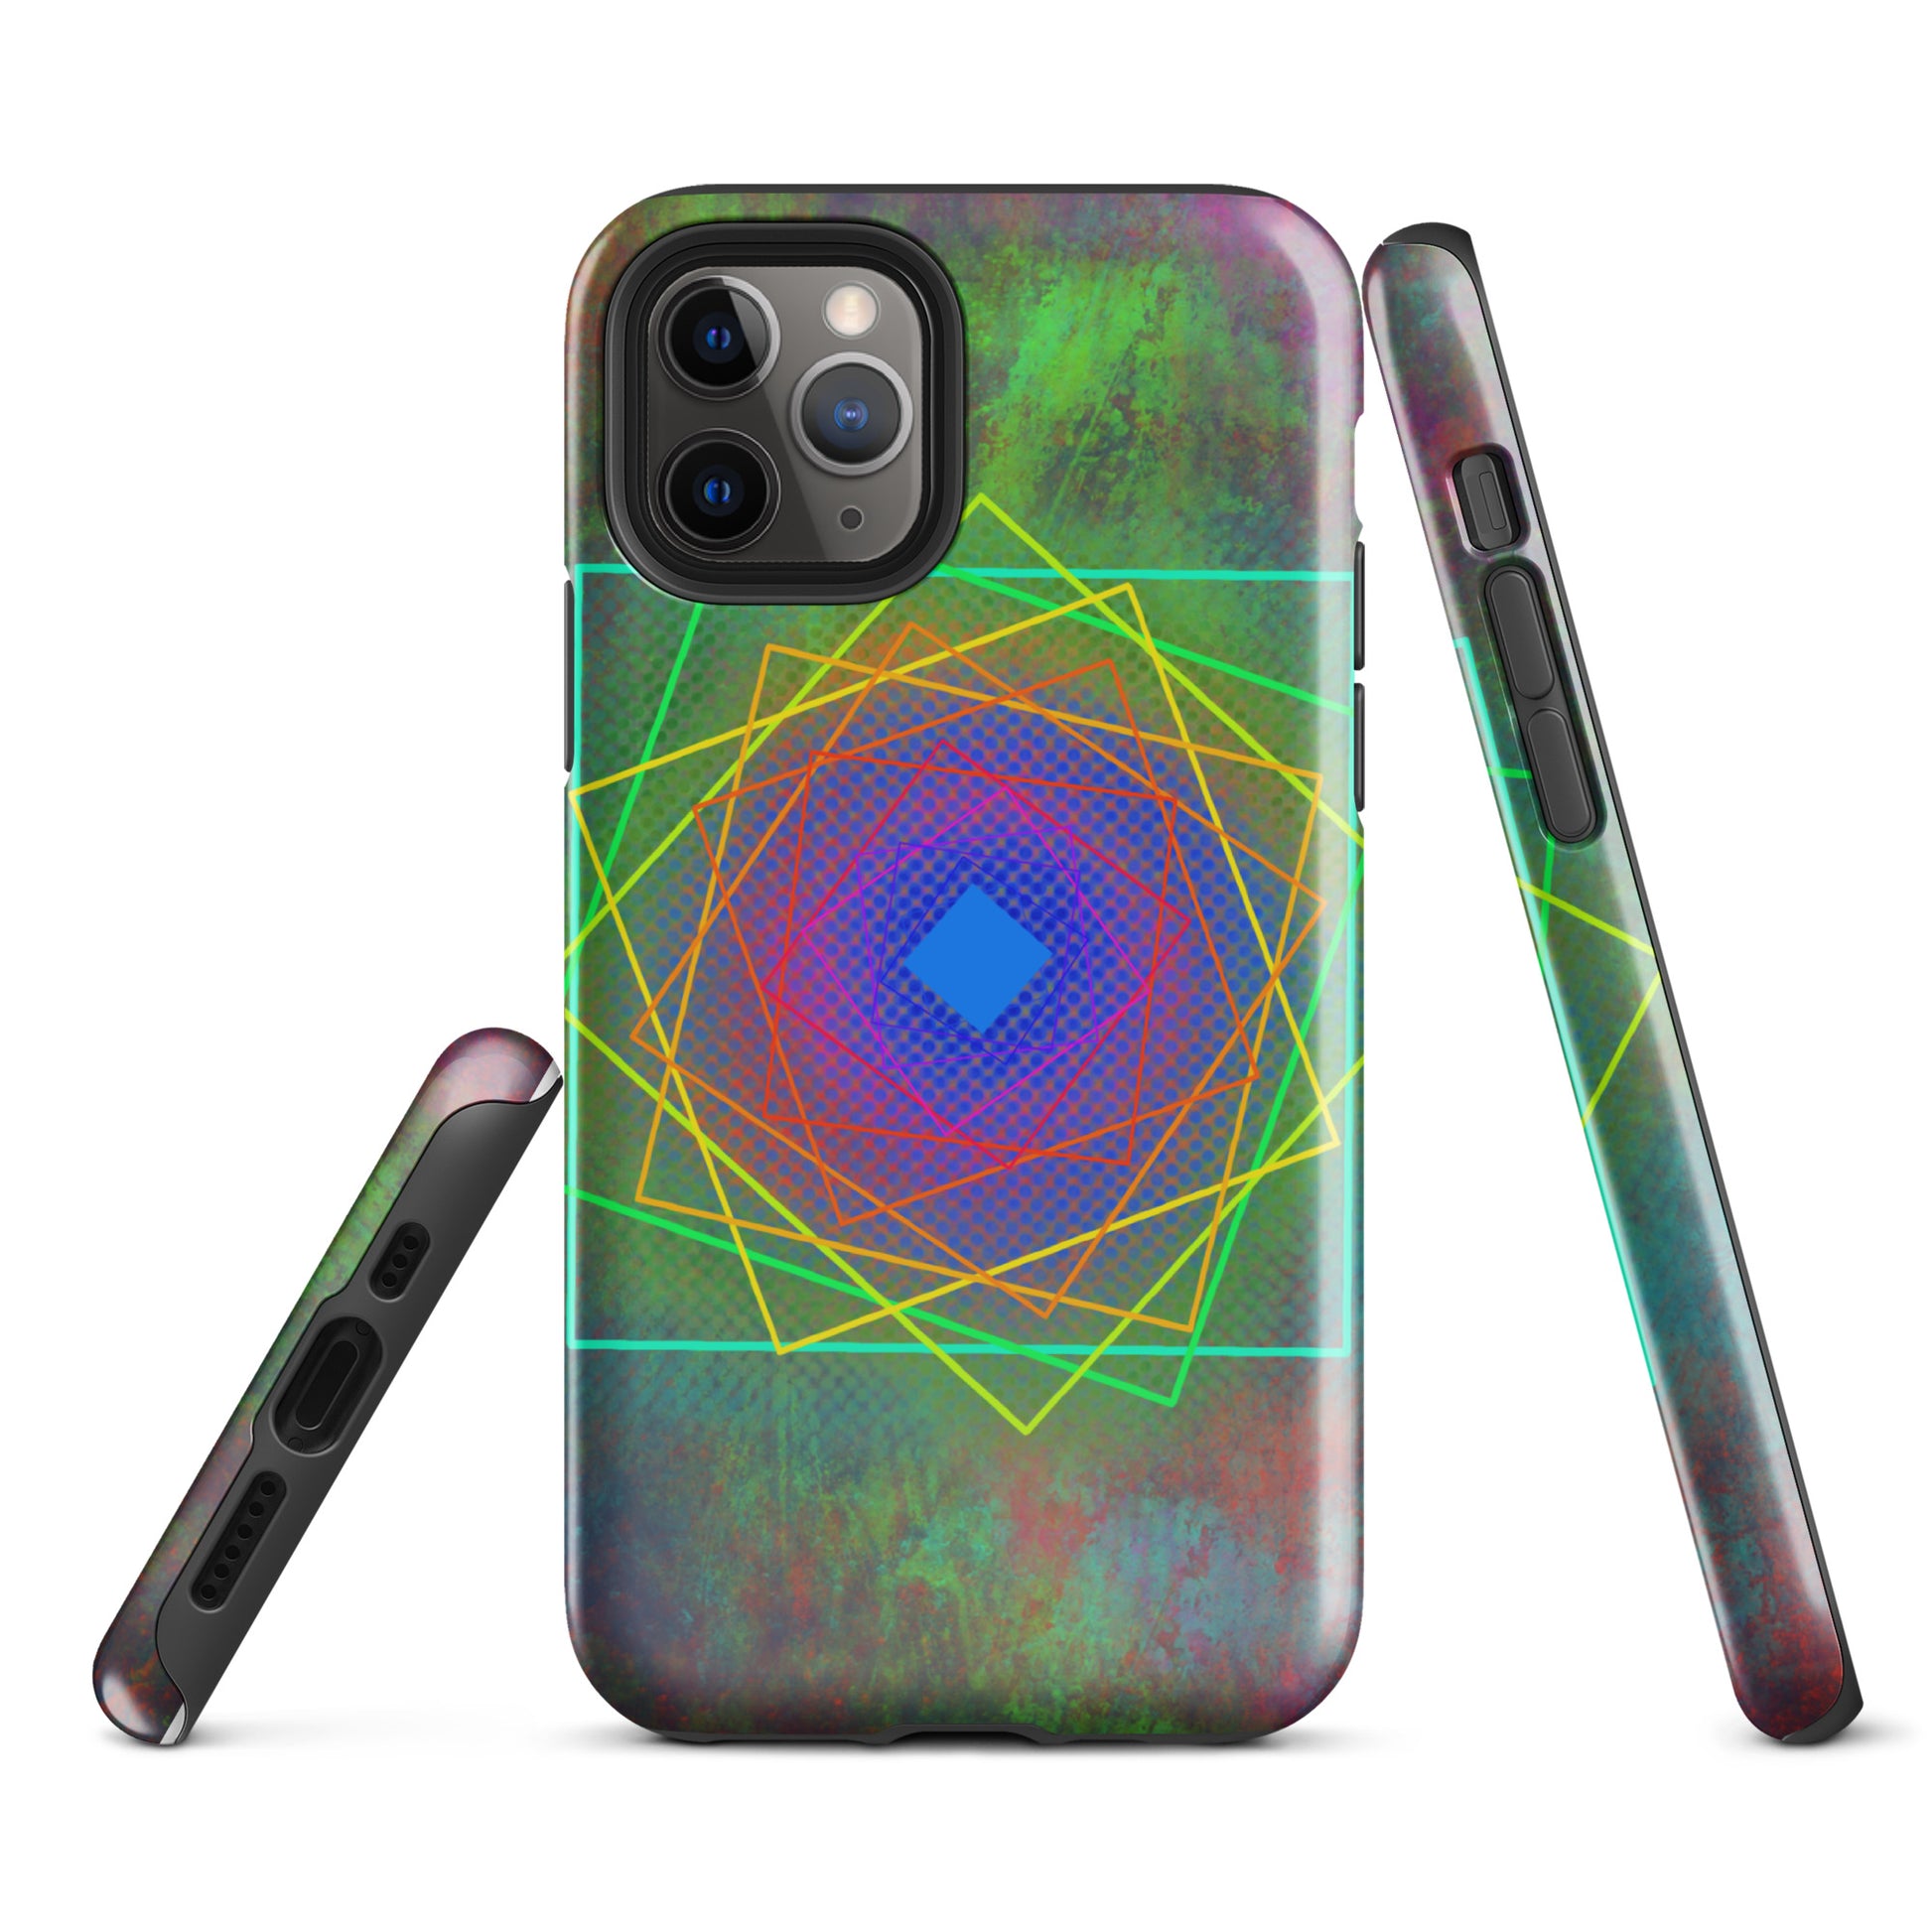 A Colourful Geometric Cubes Case for the iPhone 11 Pro 